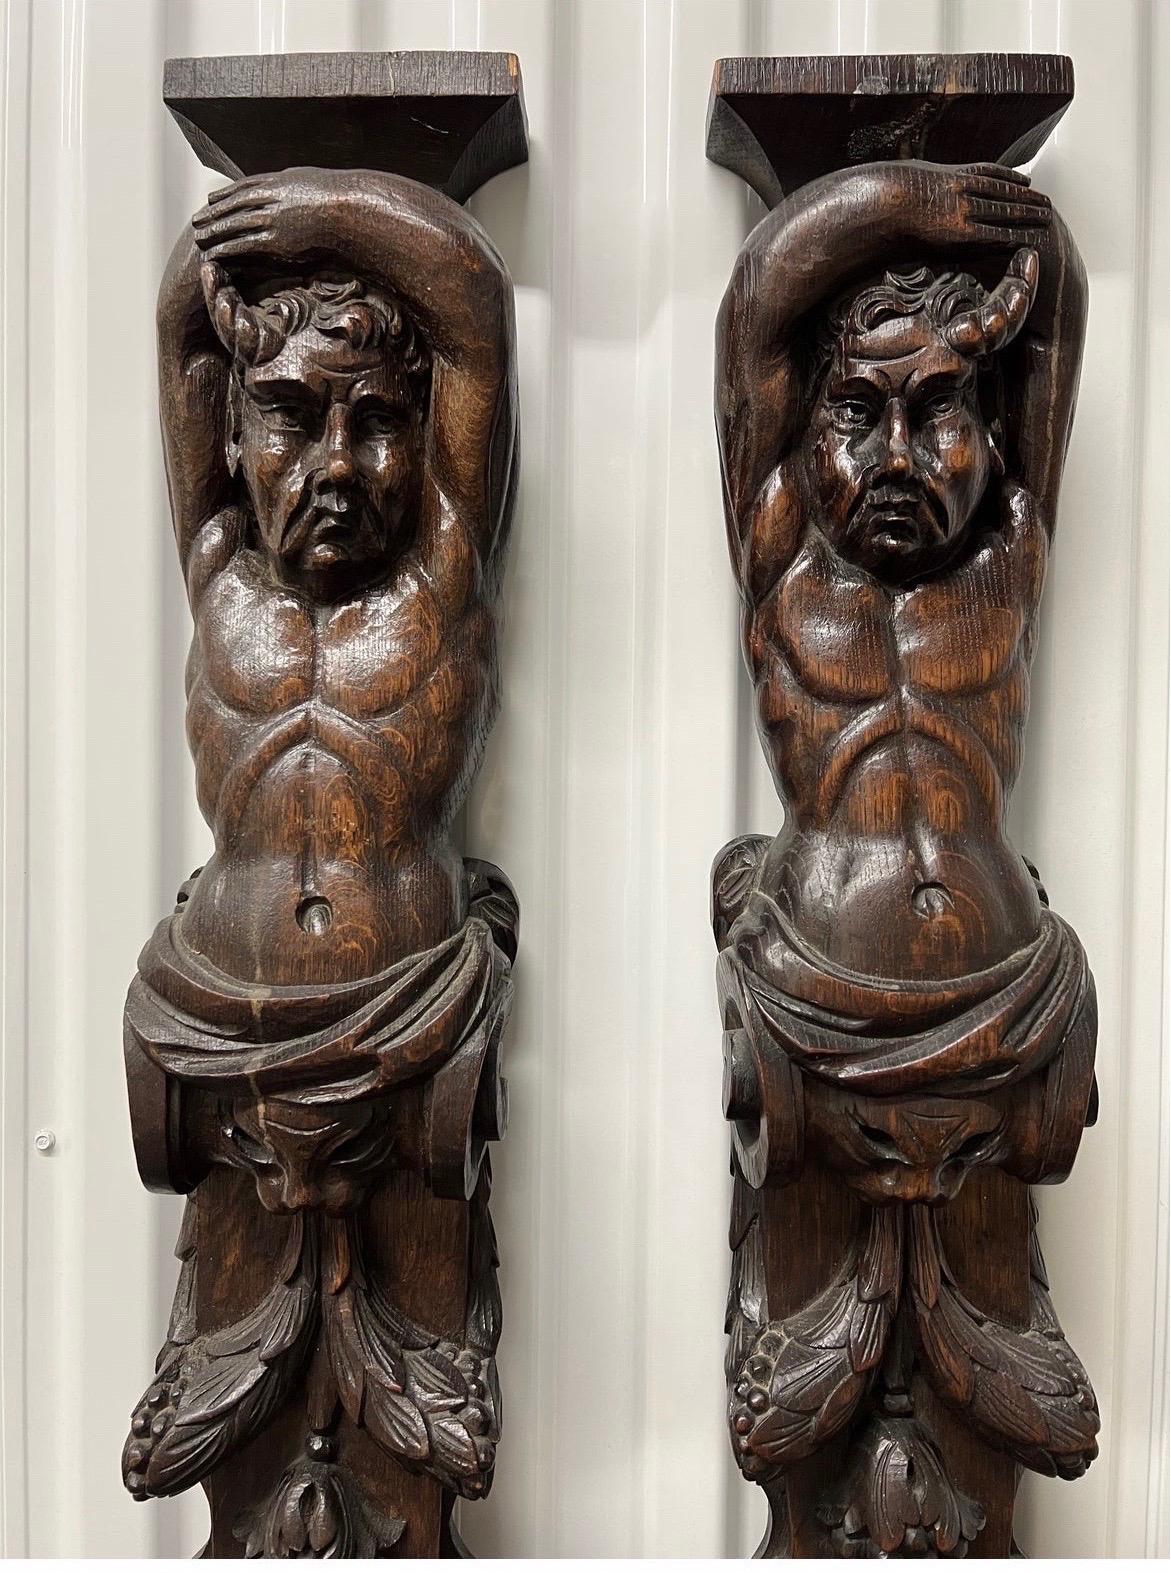 A pair of opposing highly carved wall mount sculptures. Absolutely incredible detail of “Angel & Demons”. Likely salvaged from an old fireplace mantel or entryway. Directly from a NYC estate.